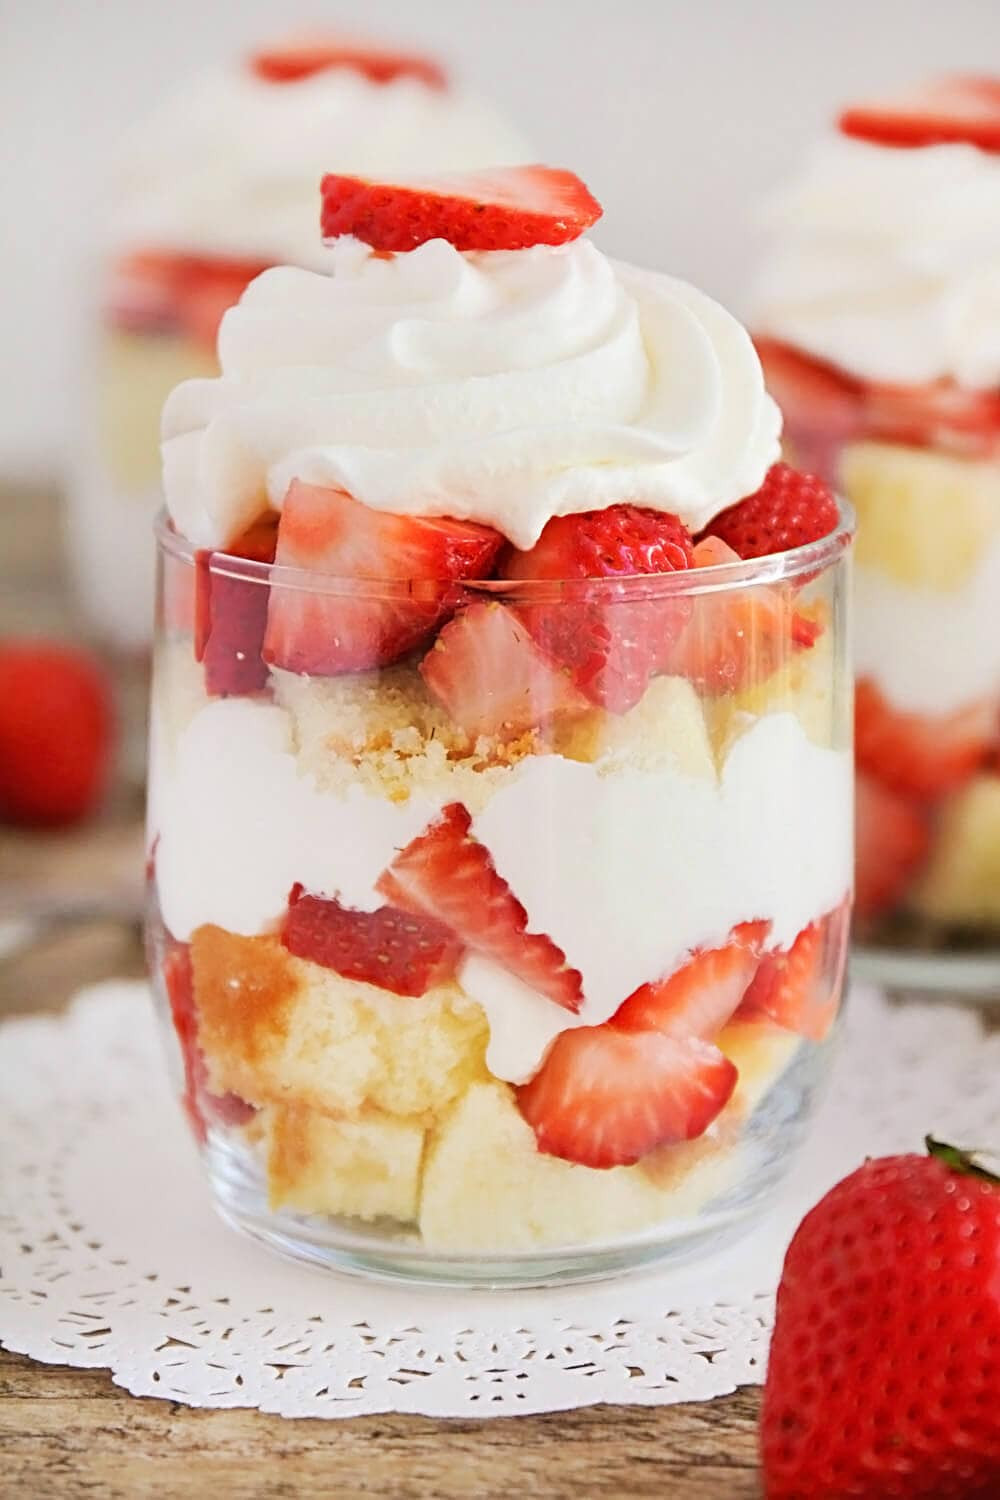 Simple Strawberry Desserts
 EASY Strawberry Shortcake Trifle I Heart Nap Time